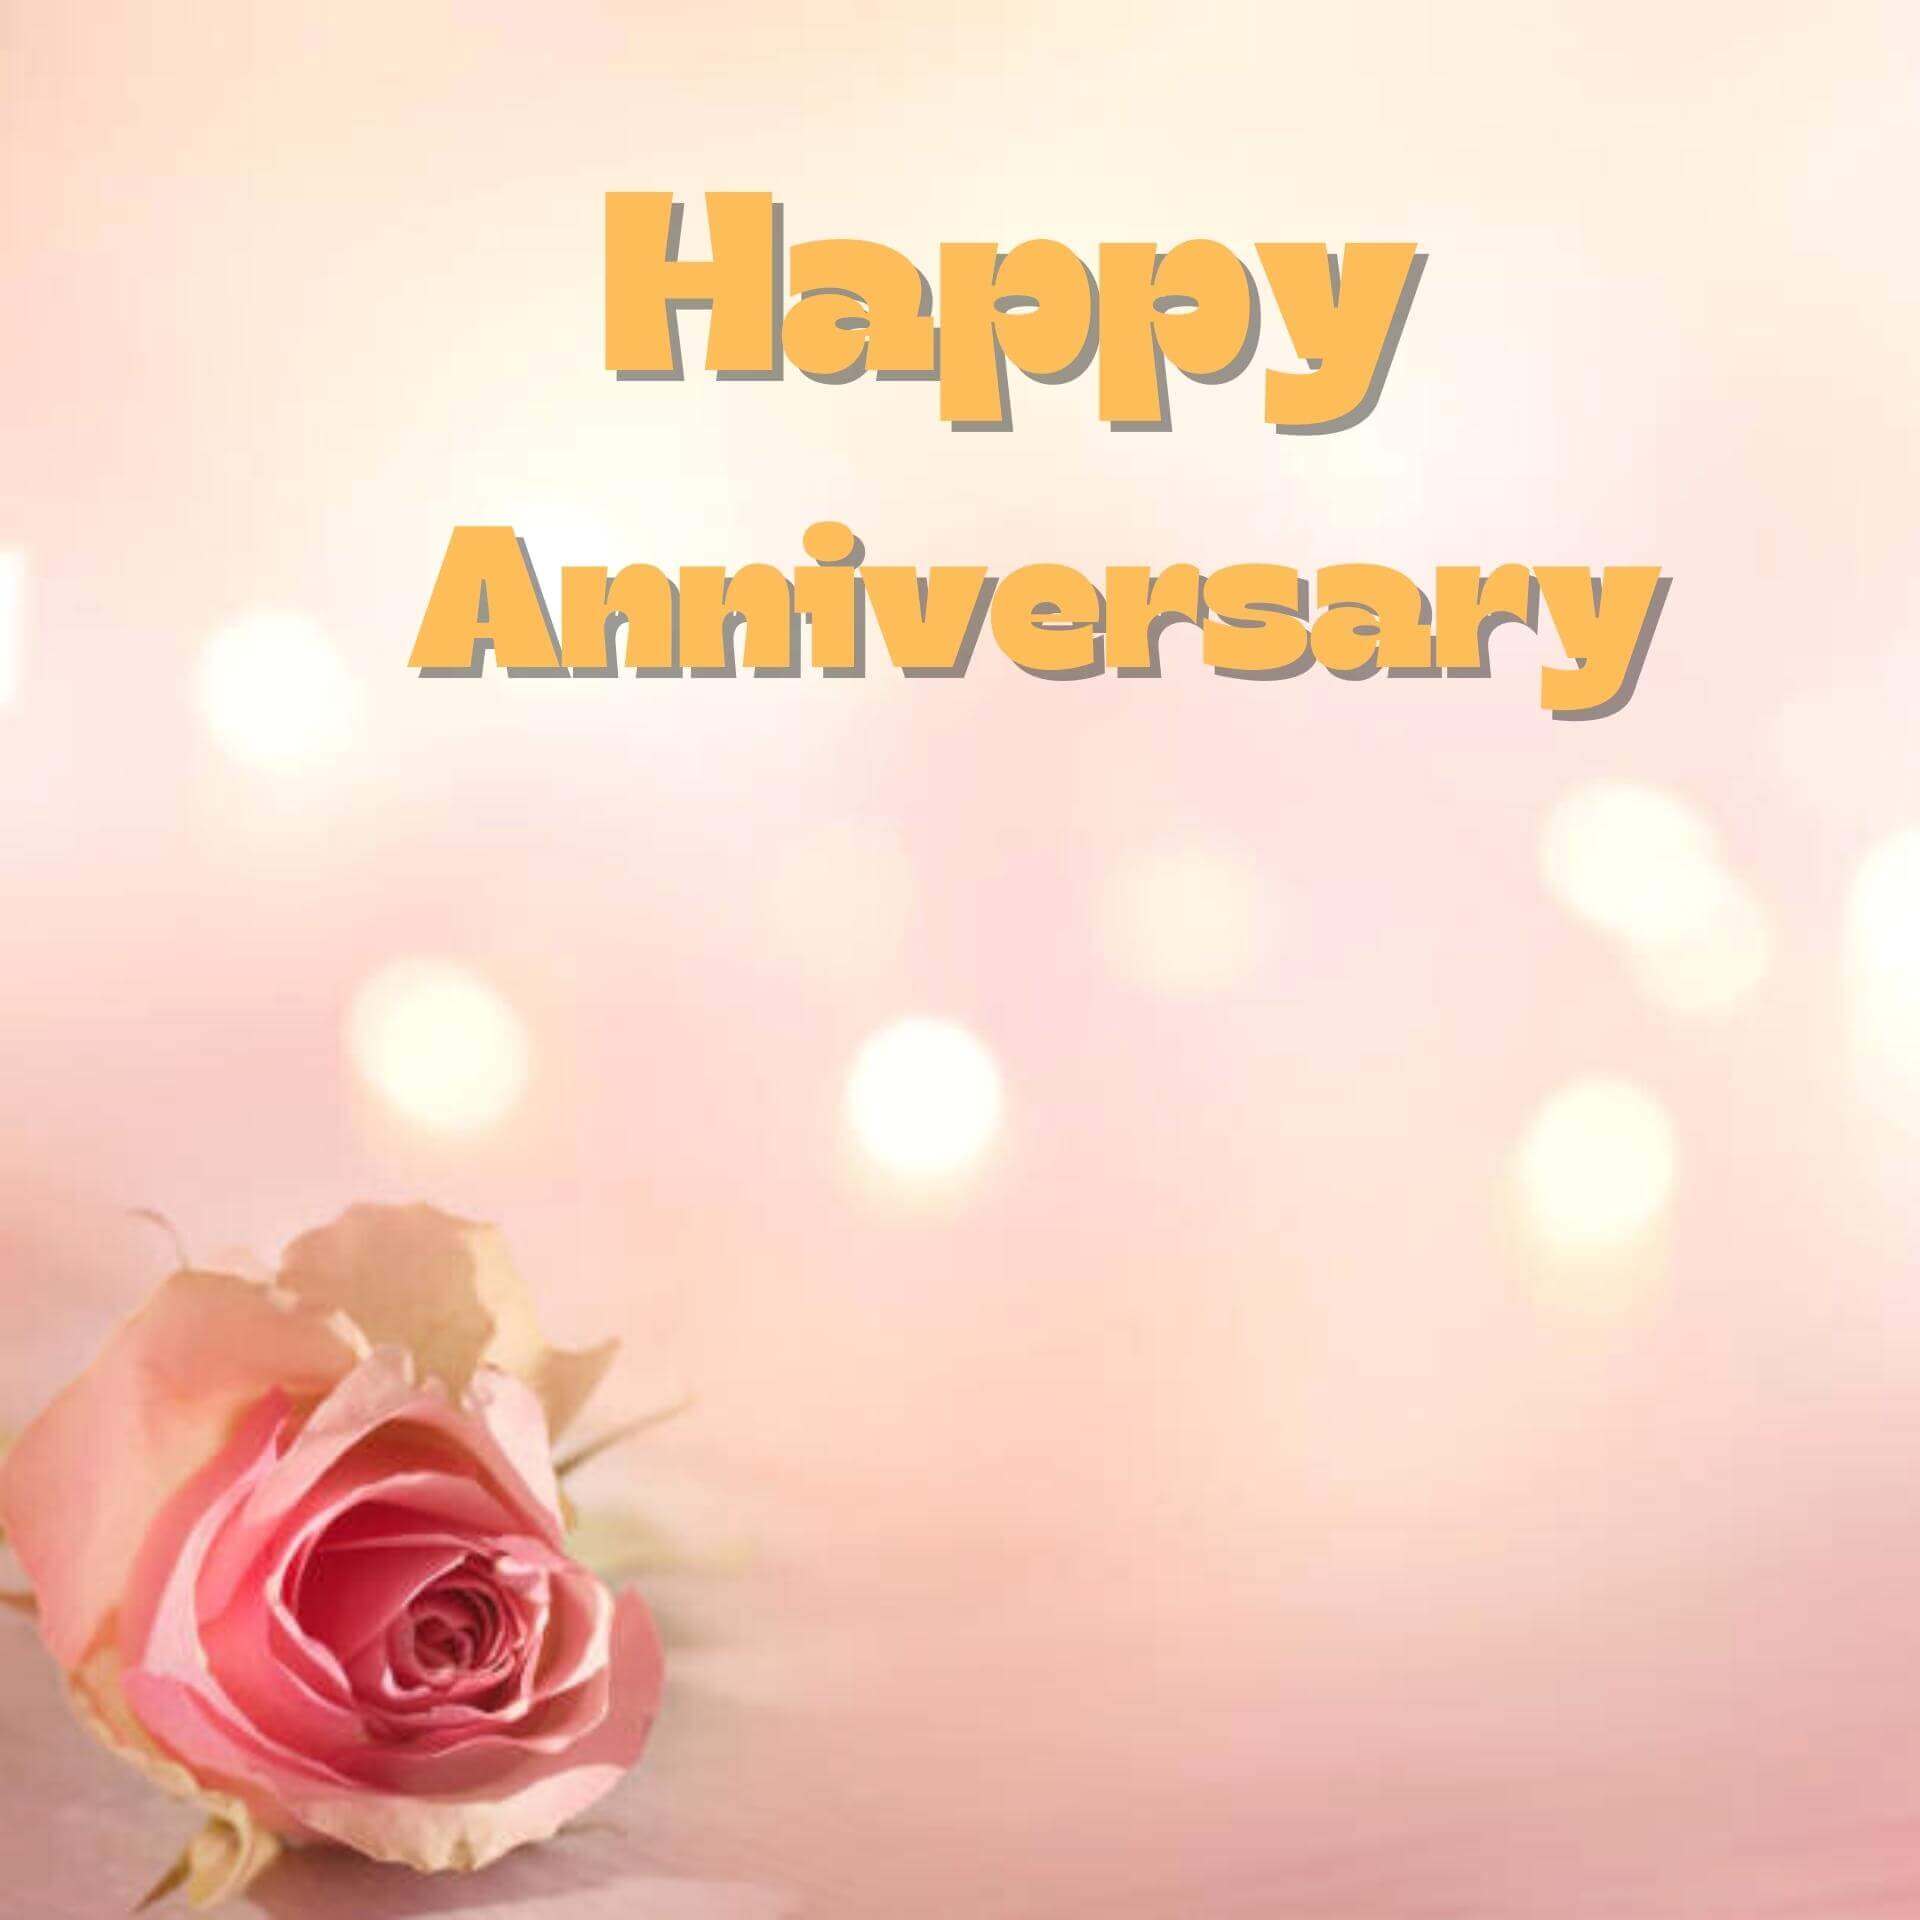 happy anniversary images Wallpaper New Download 2